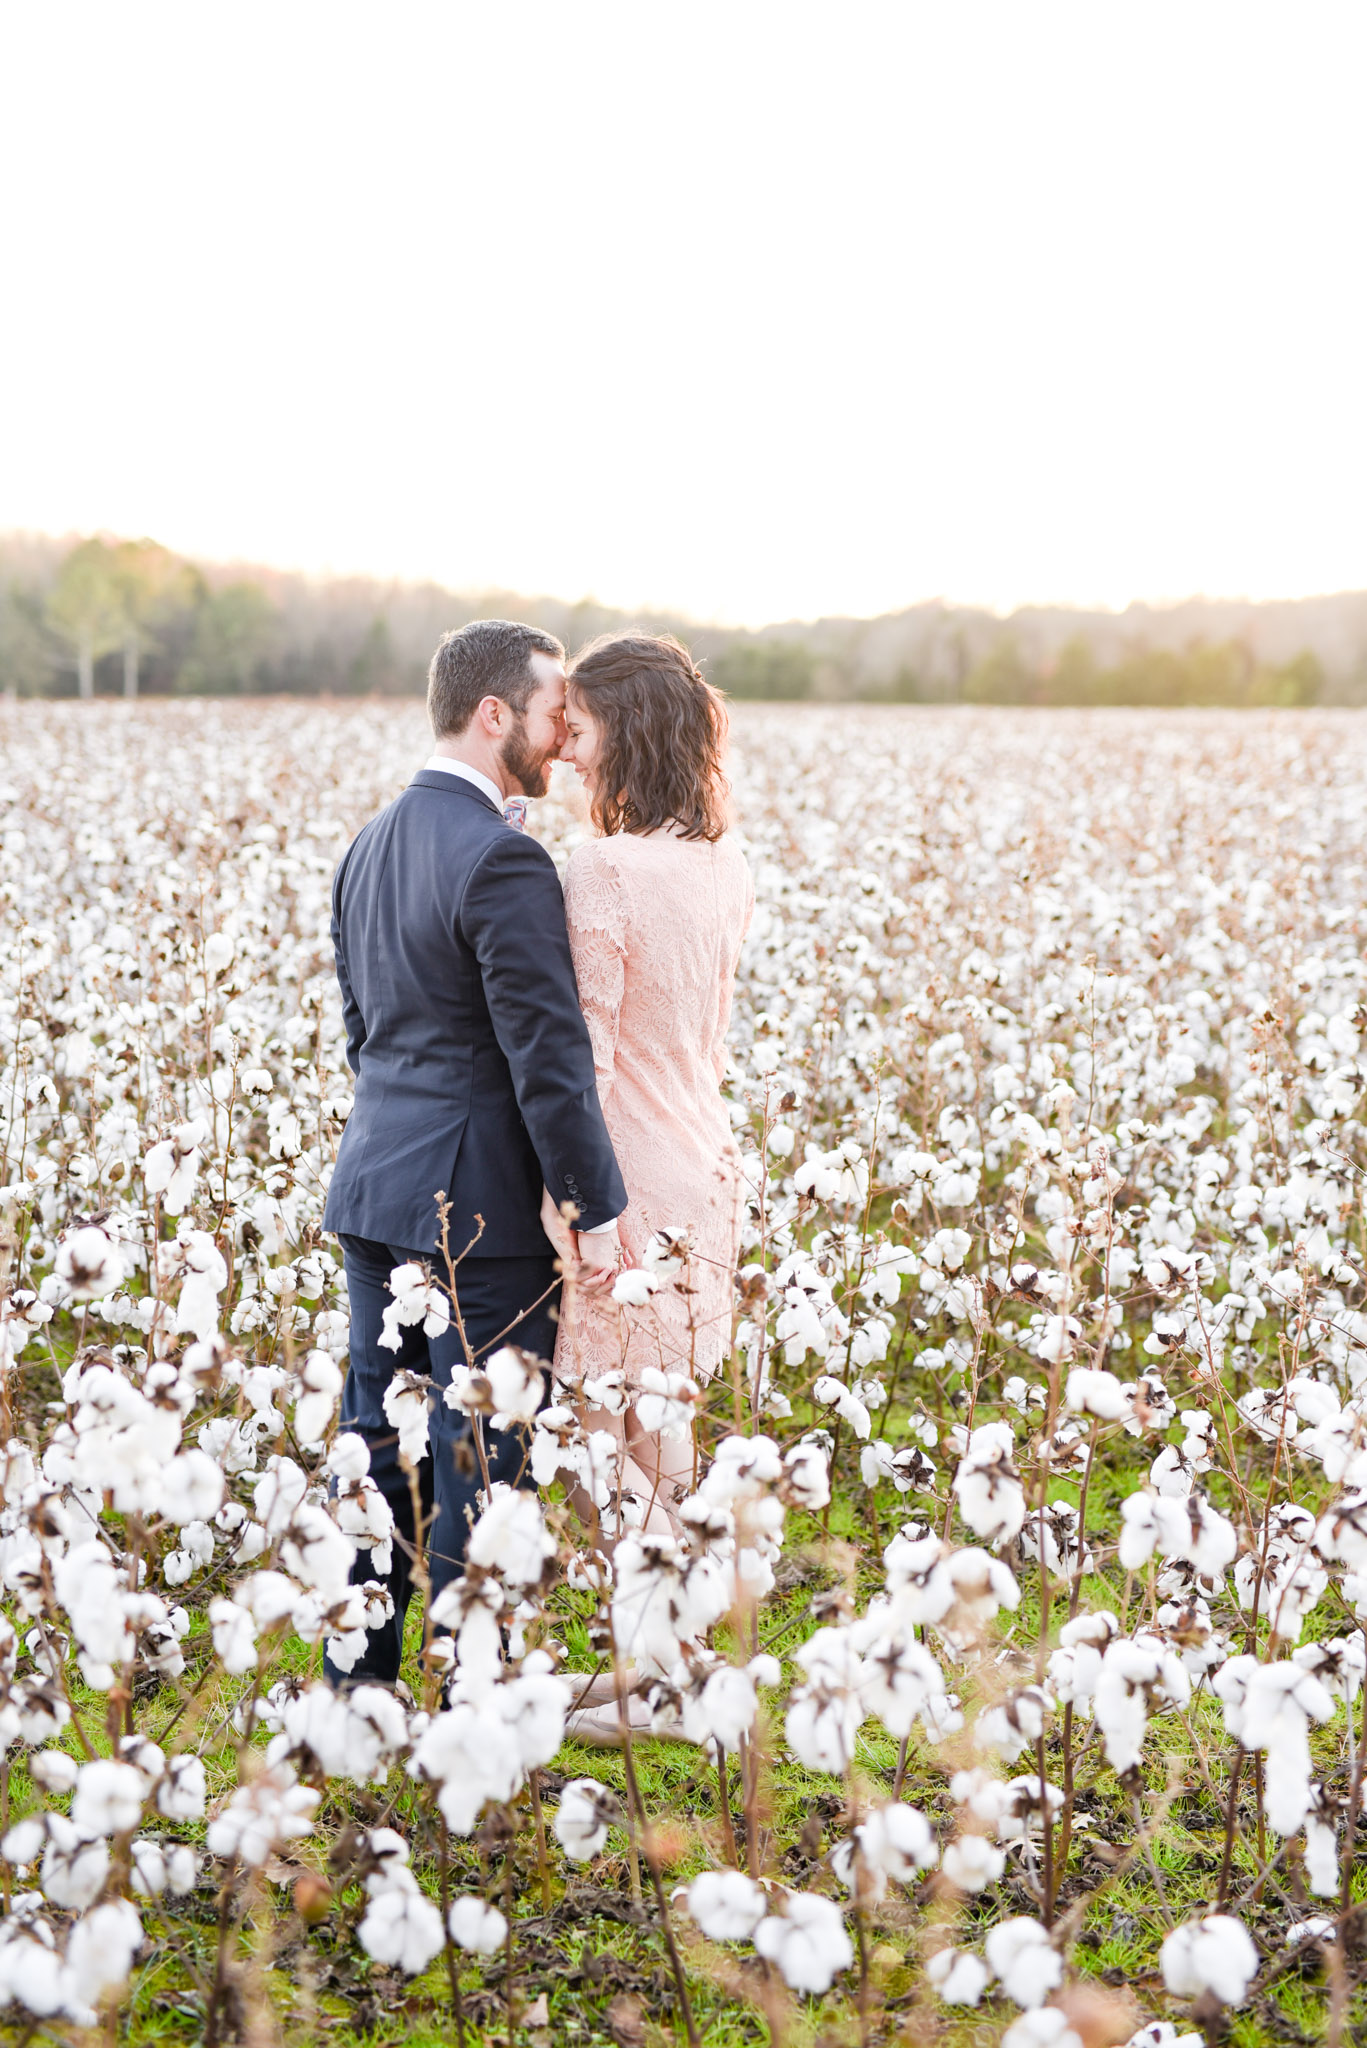 Couple leans on each other in cotton field.